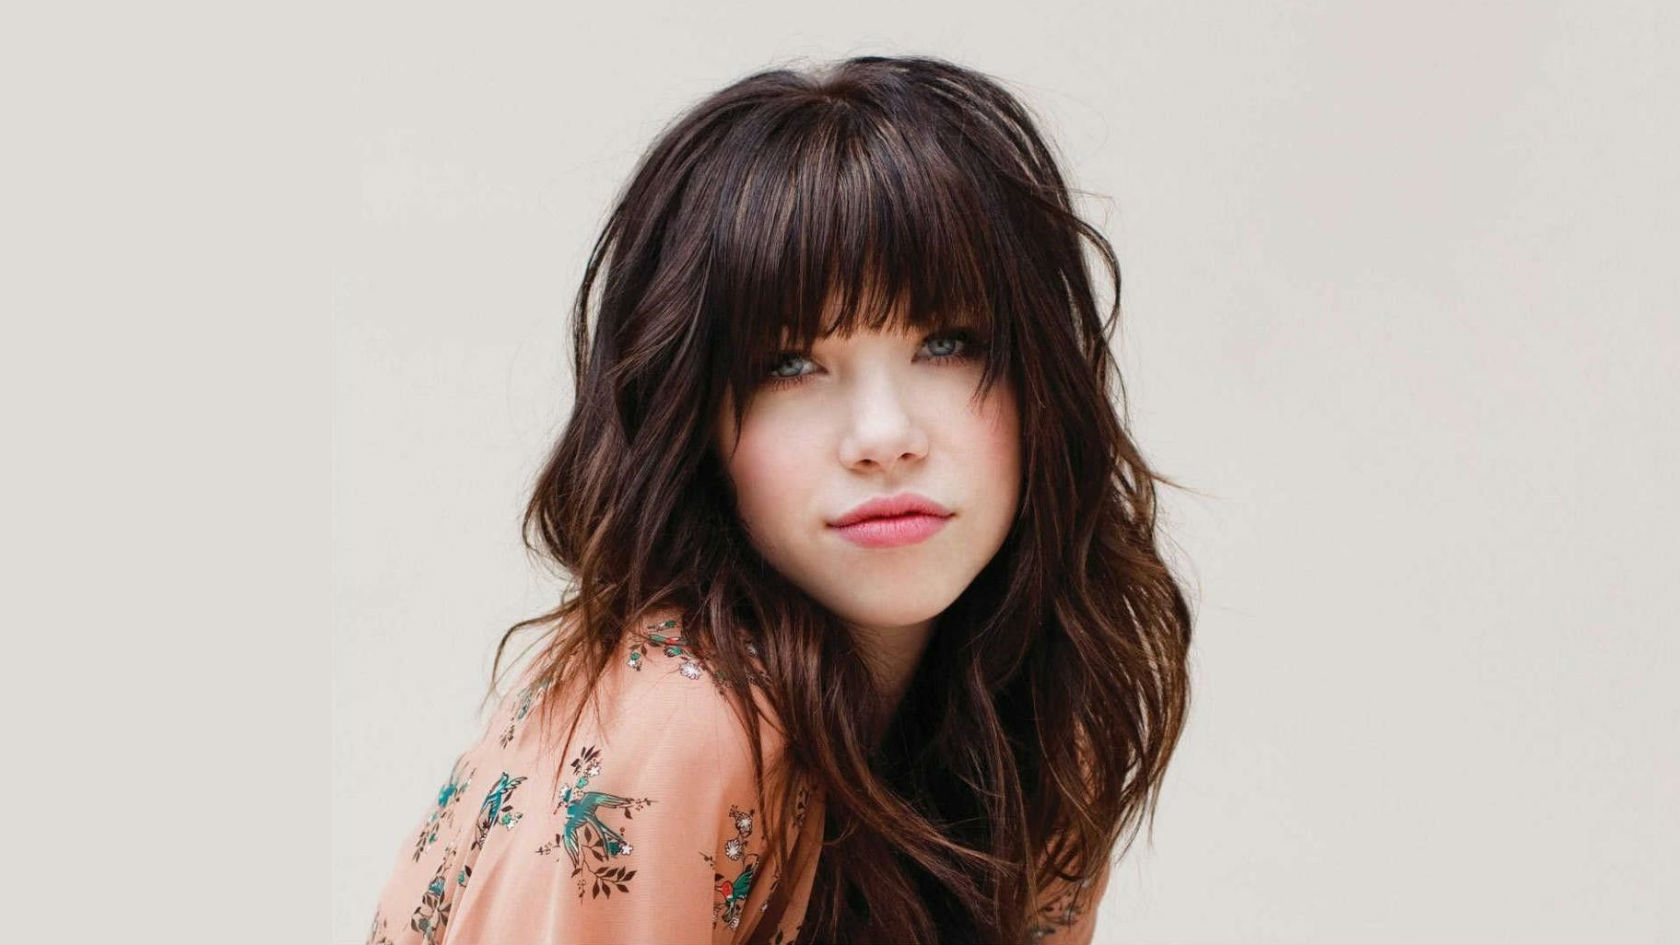 Carly Rae Jepsen Drops New Single 'I Really Like You' | lifewithoutandy